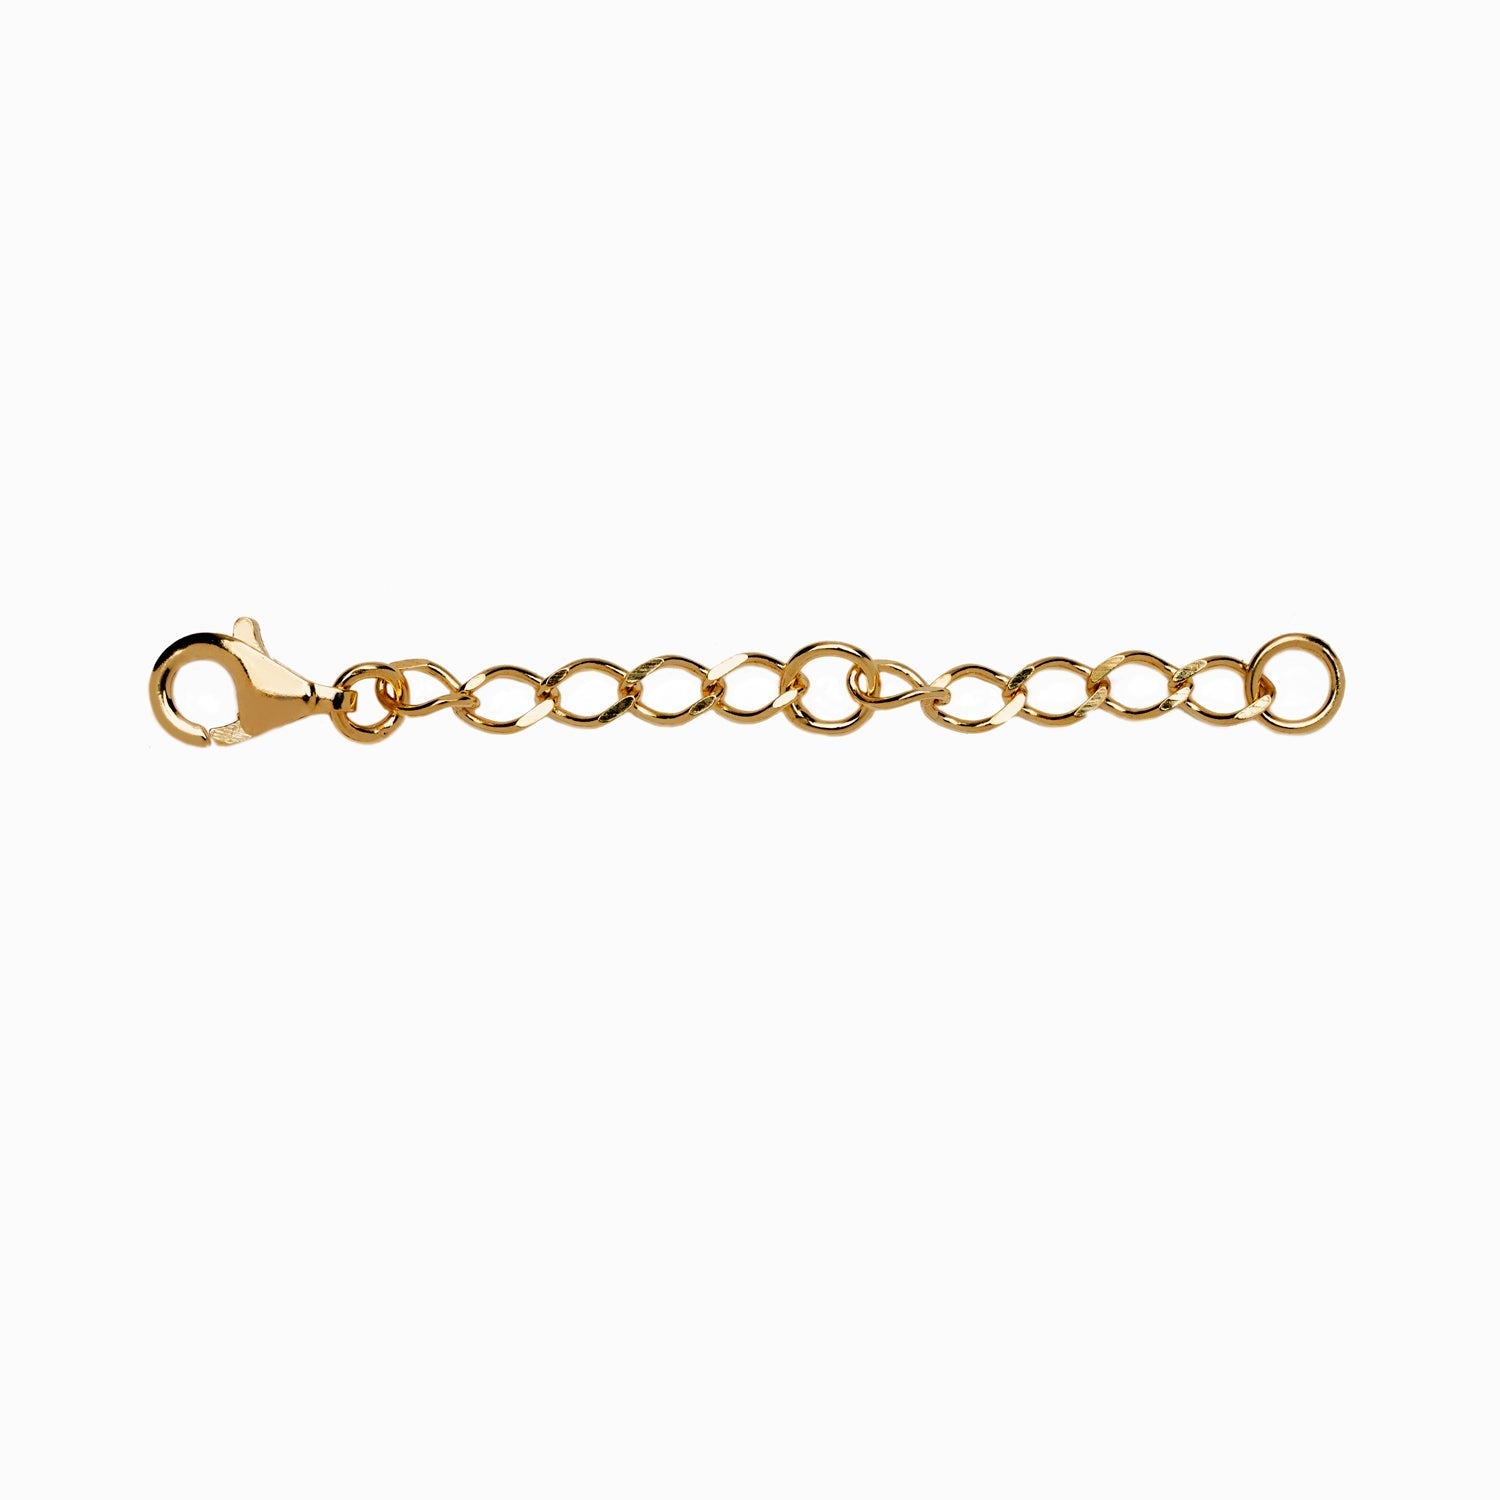 4-8pcs Stainless Steel Extended Chains For Necklace Extension Chain For  Jewelry Making Supplies Findings With